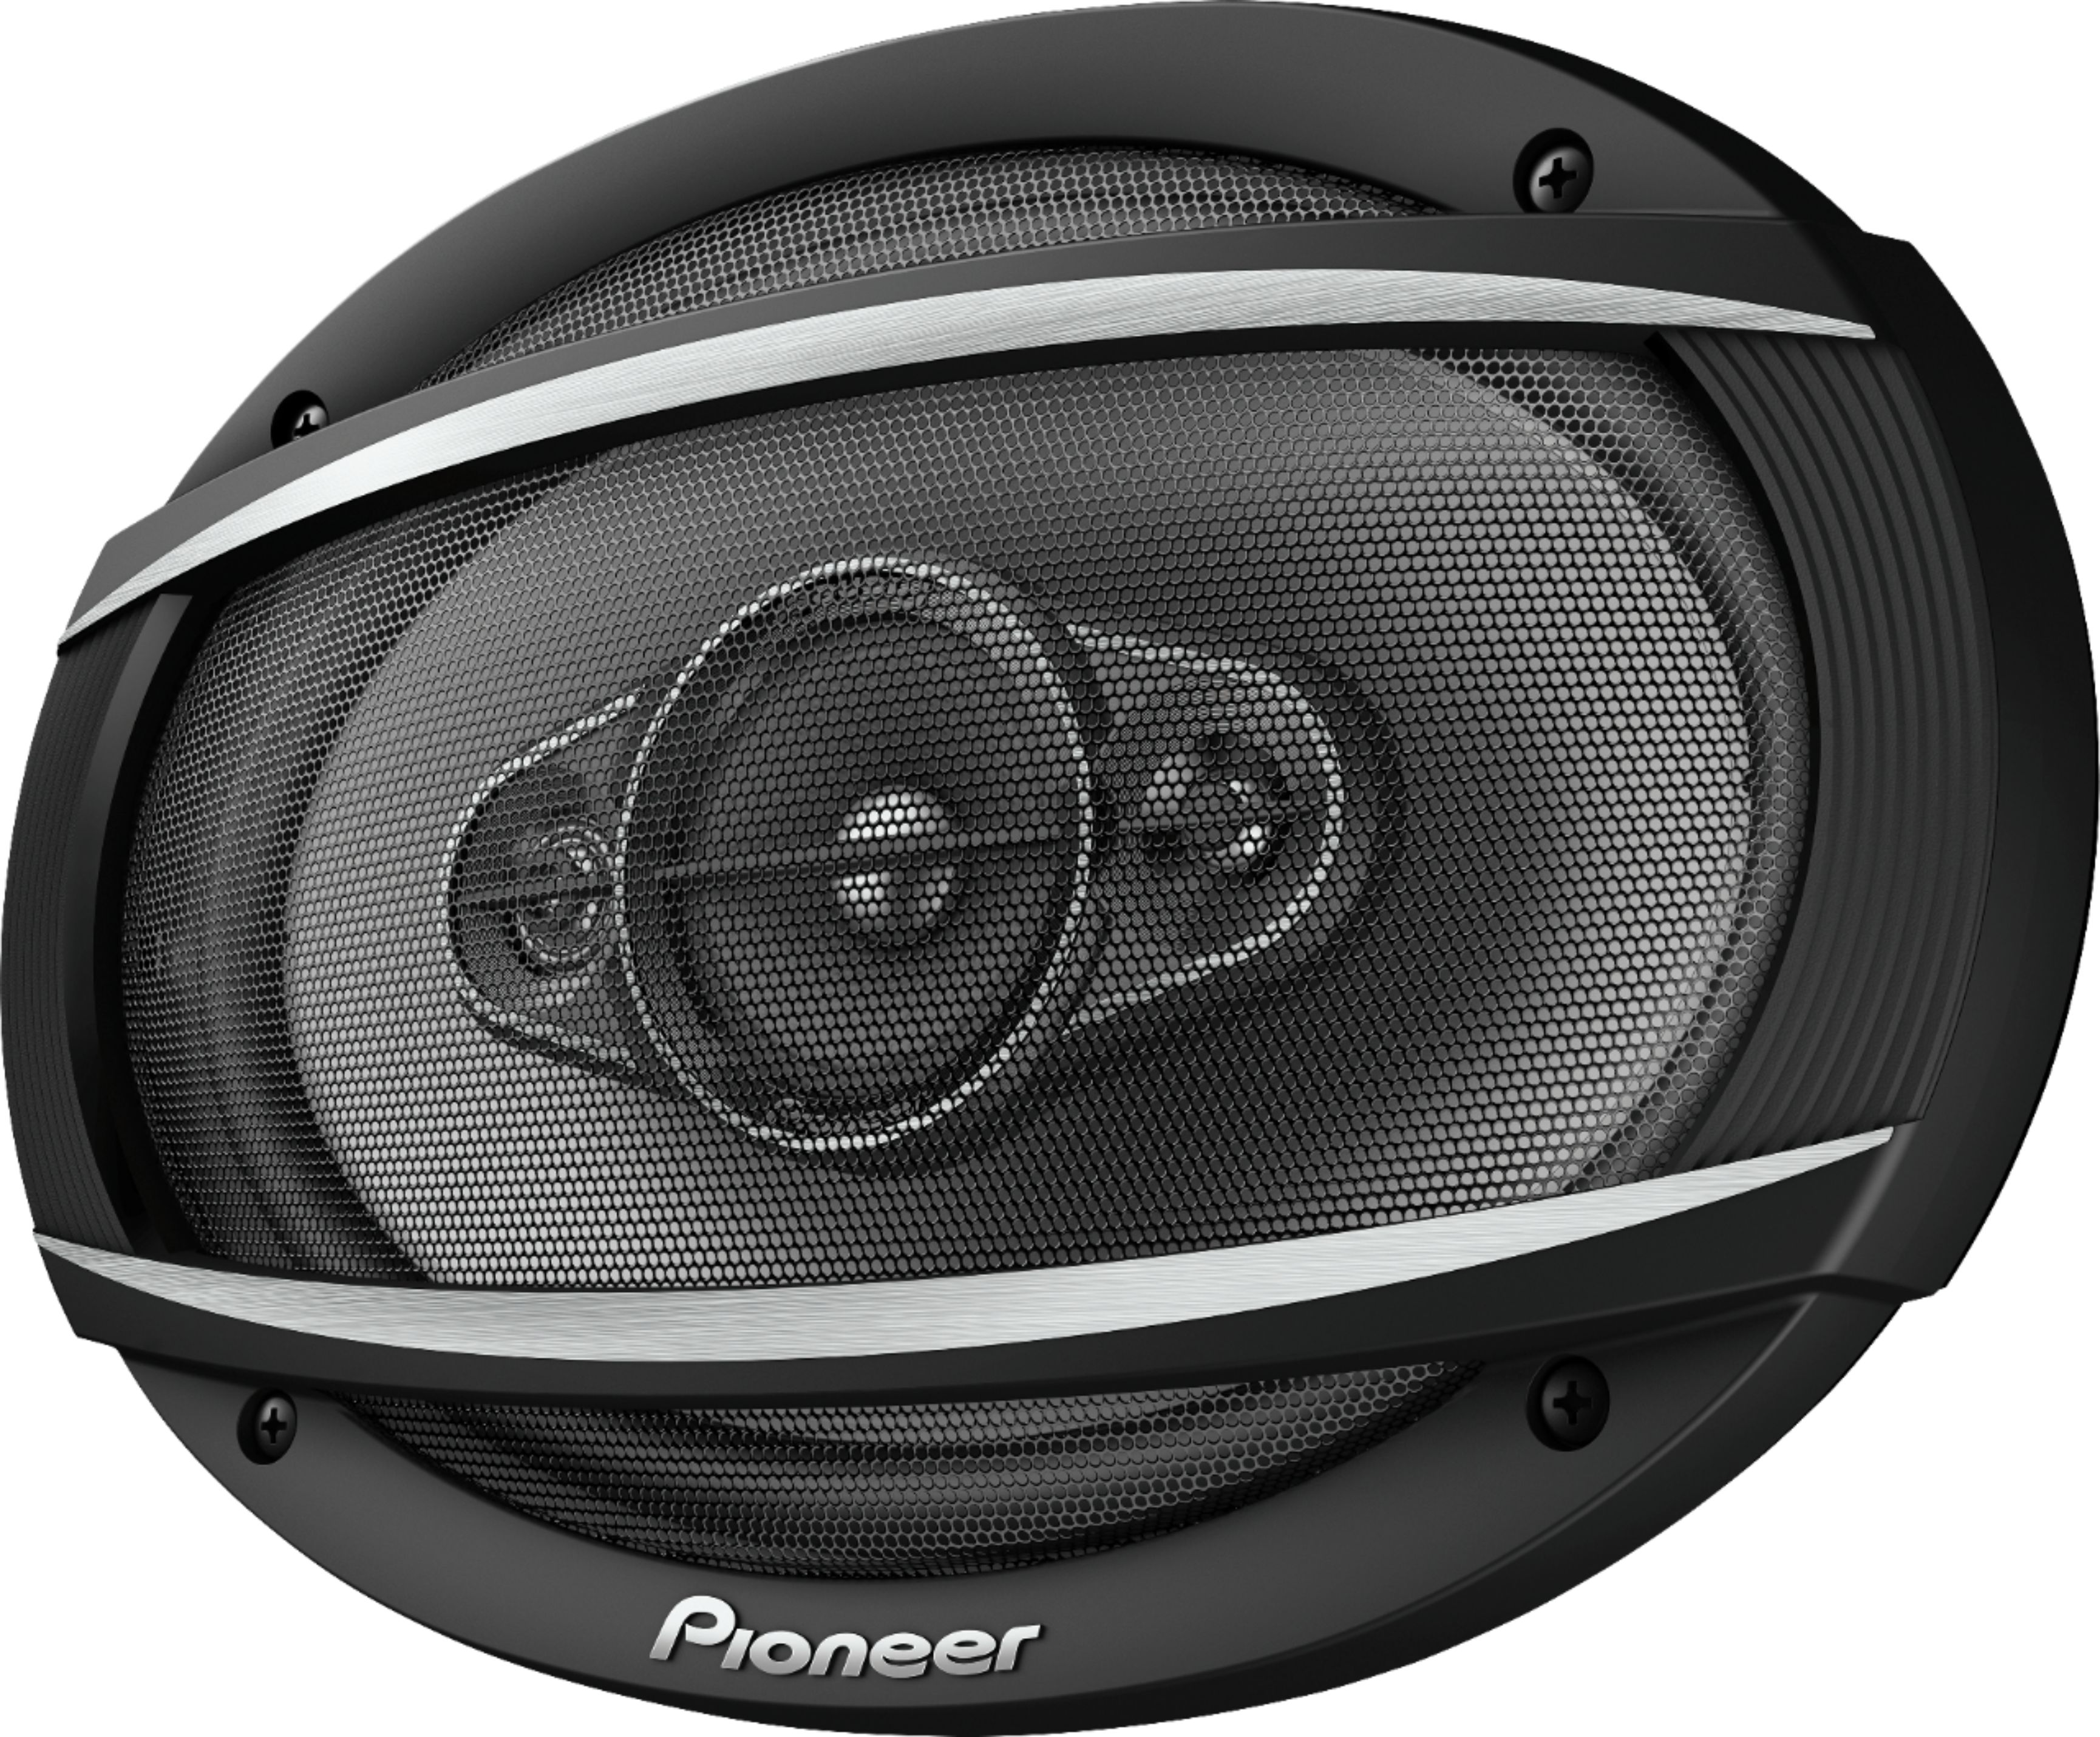 Angle View: Pioneer - 6" x 9" - 4-way 450 W Max Power, IMPP™ cone, 18mm Tweeter and 11mm Super Tweeter and 2-1/4" Midrange - Coaxial (pair) - Black